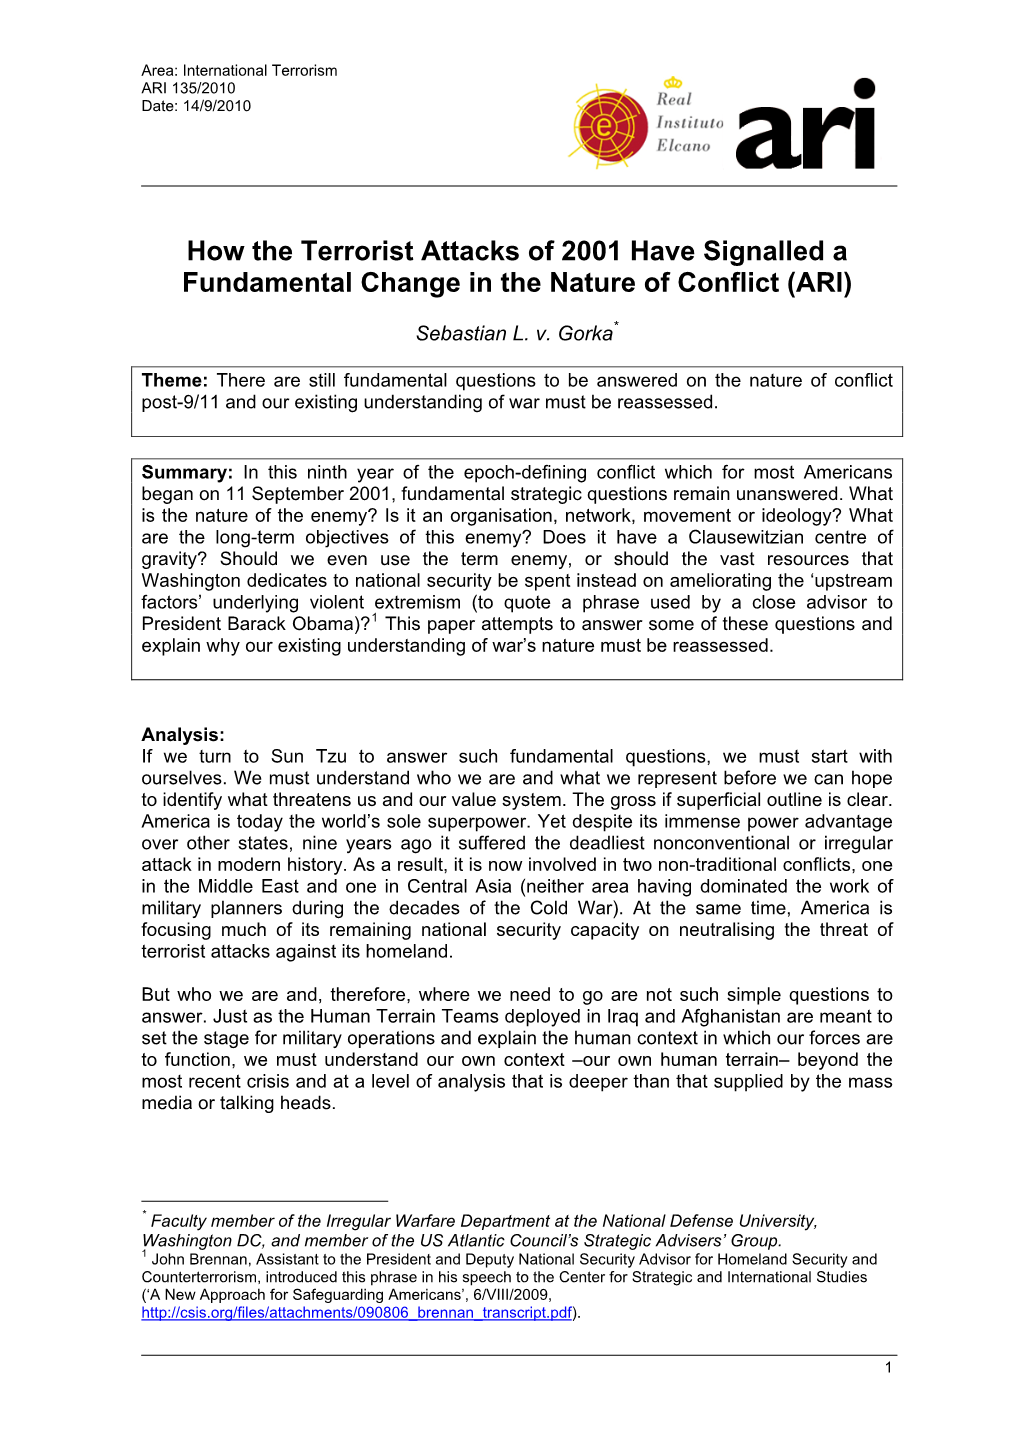 How the Terrorist Attacks of 2001 Have Signalled a Fundamental Change in the Nature of Conflict (ARI)